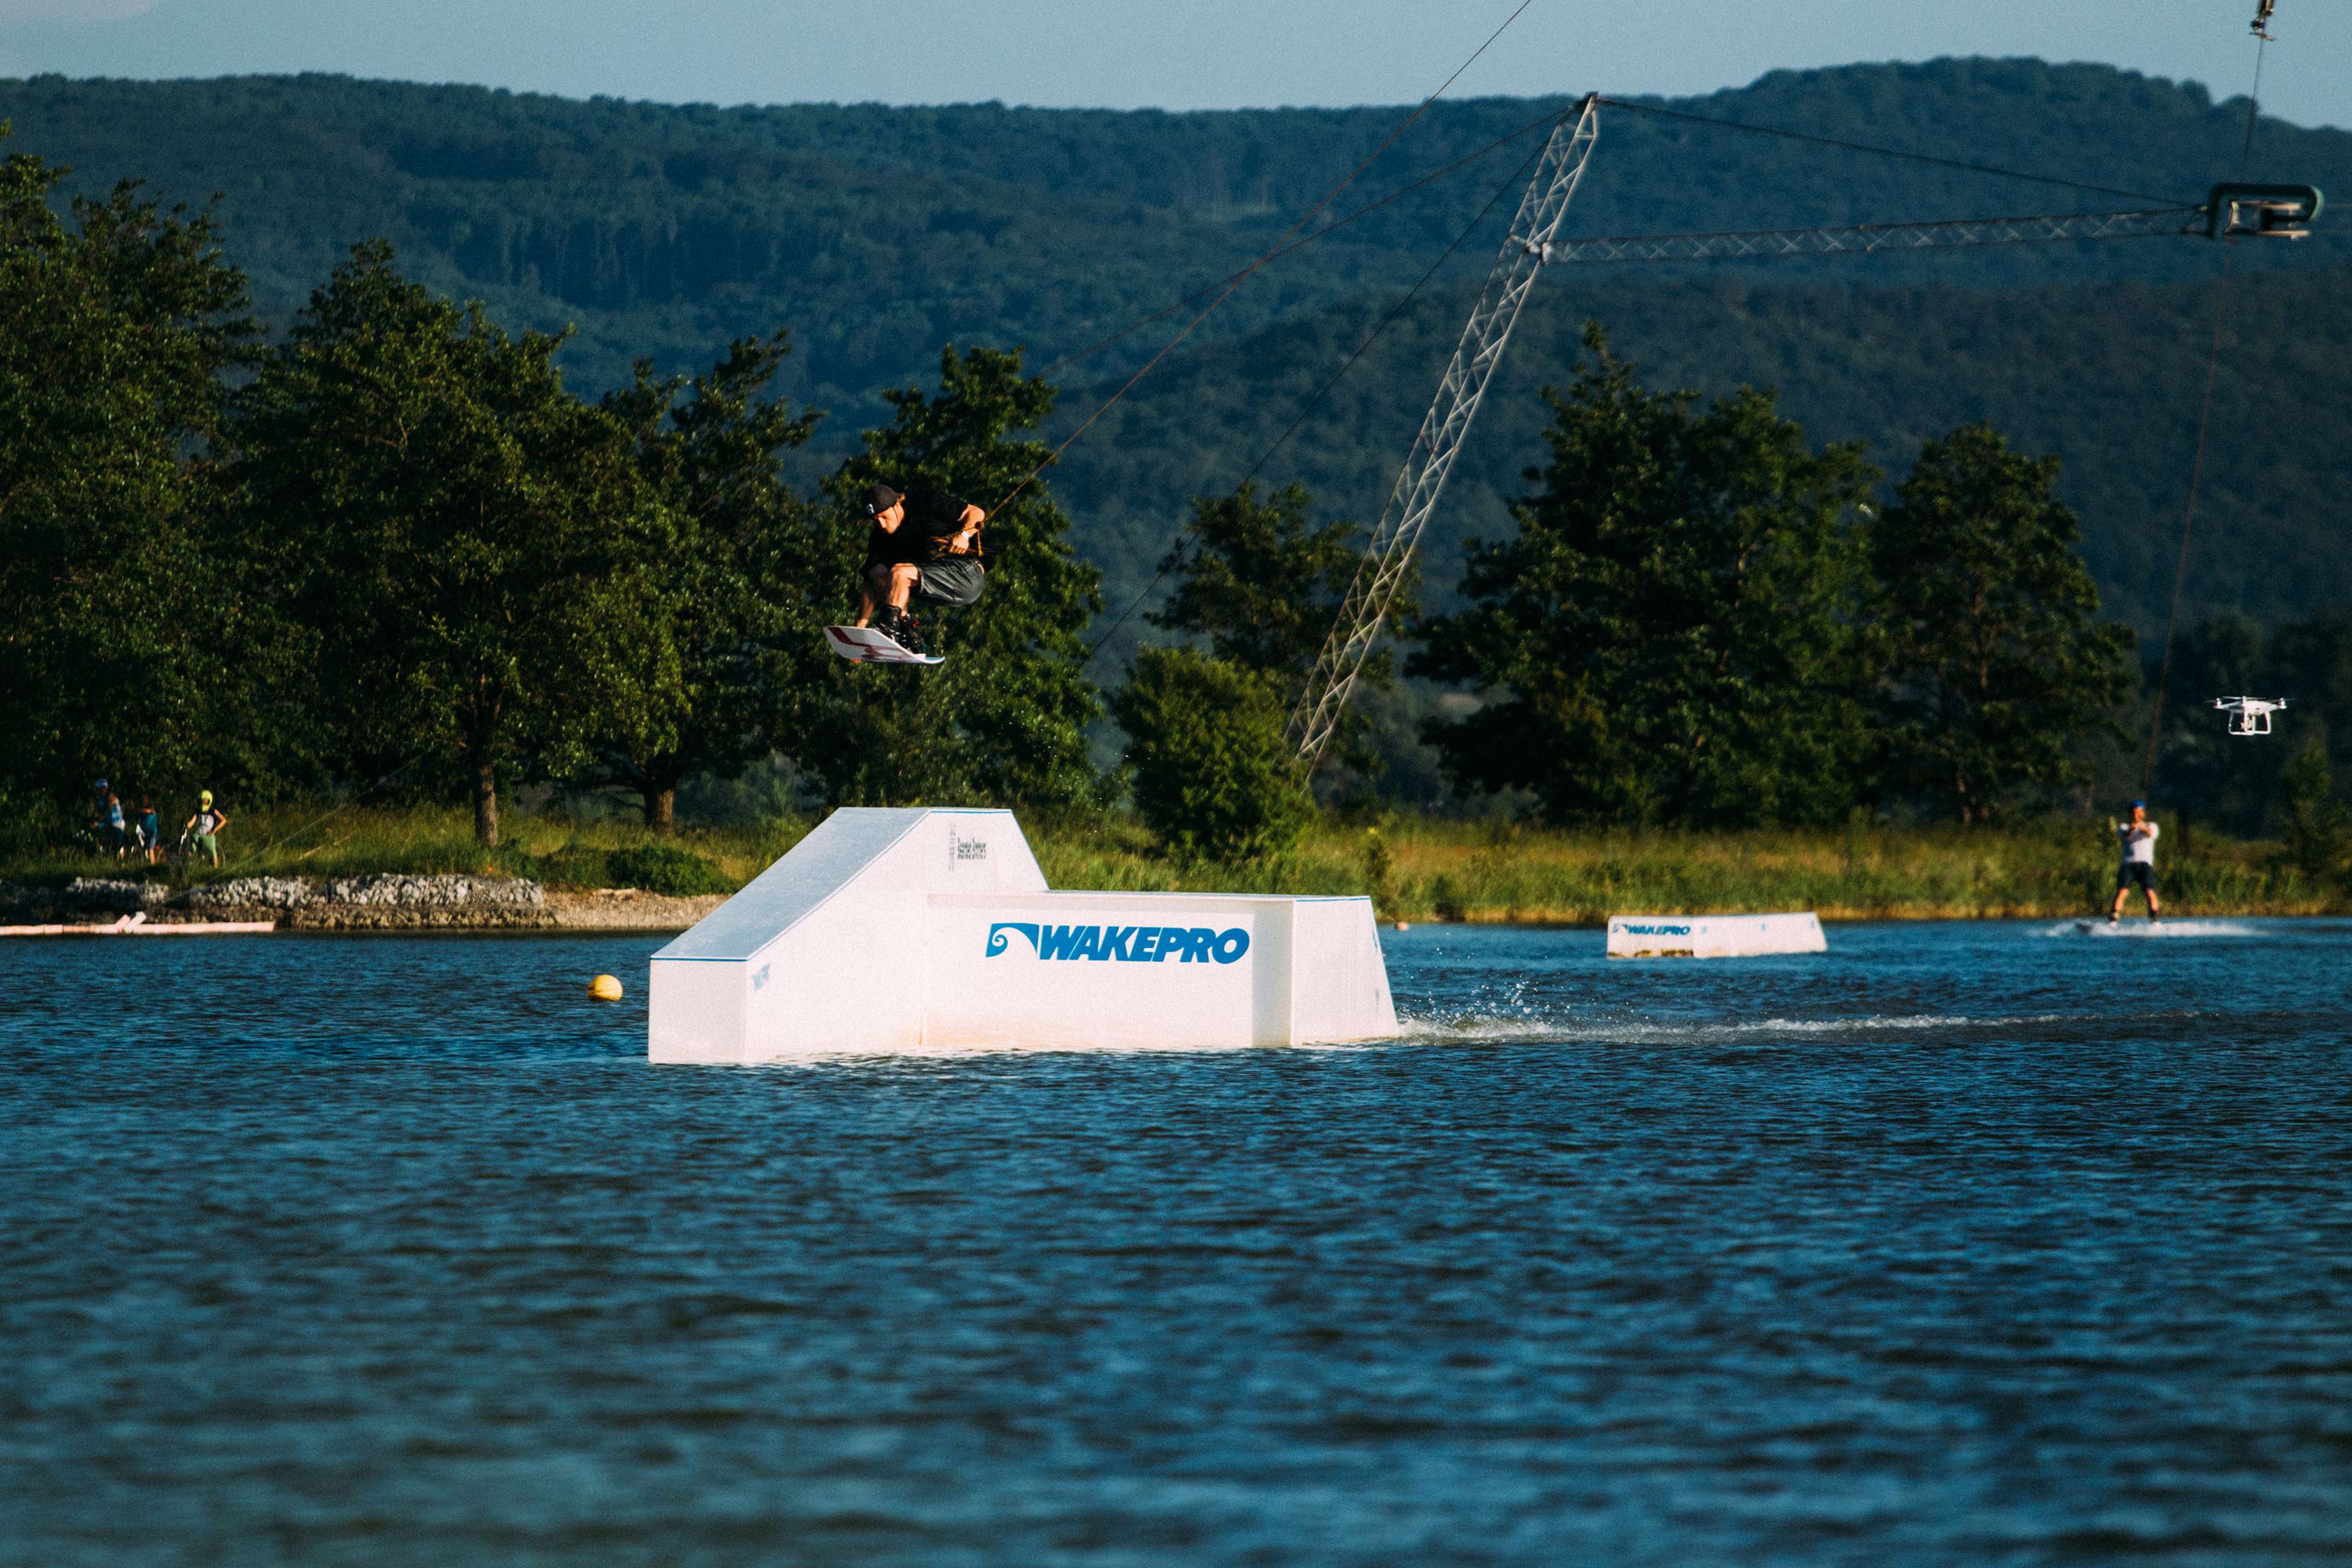 Trick on wakepro obstacle